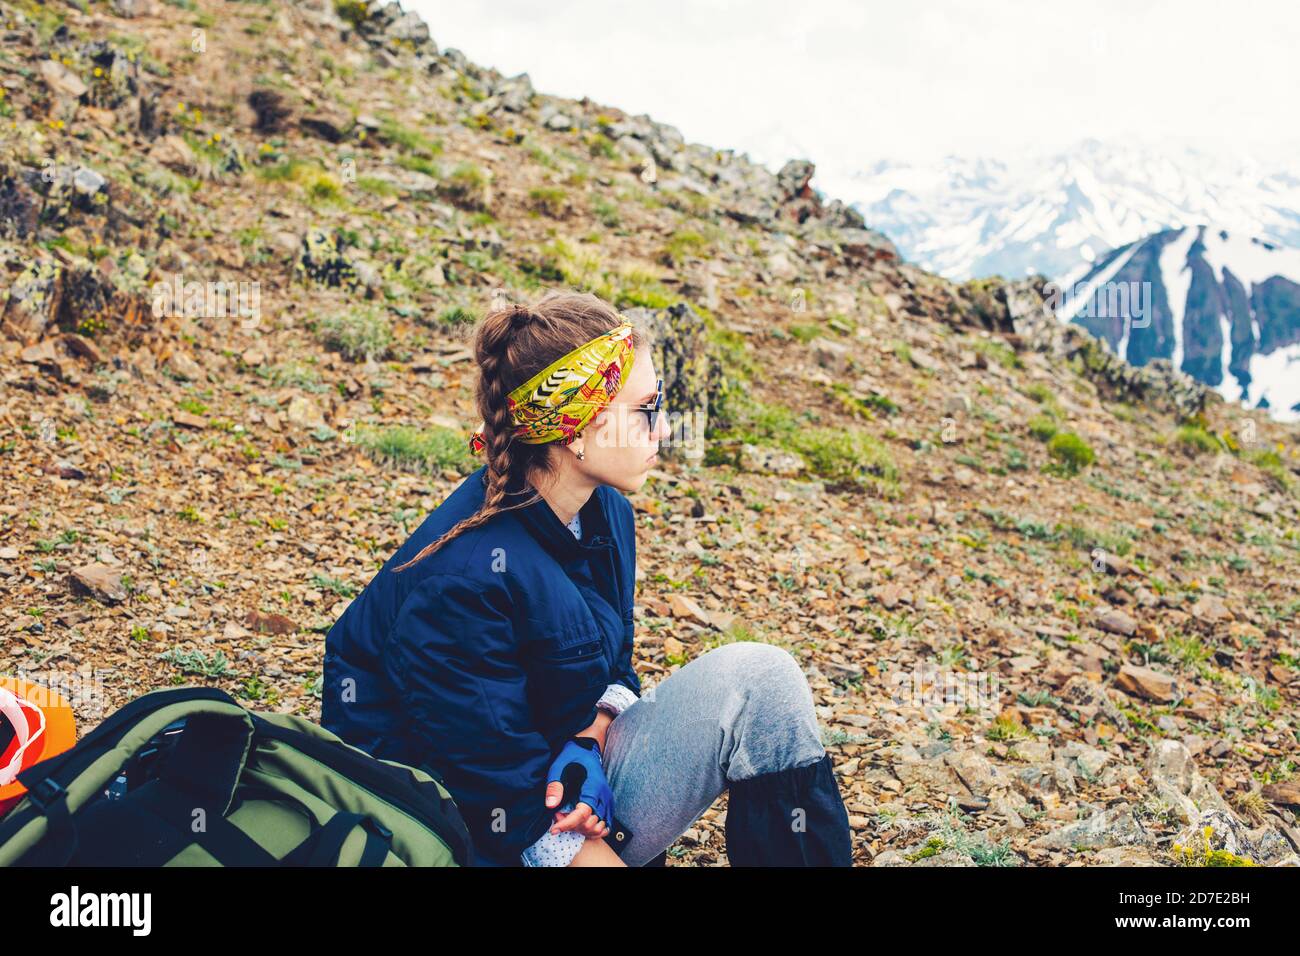 Woman traveler hiking in mountains sitting camping with backpack Travel Lifestyle adventure concept active summer vacations outdoor mountaineering Stock Photo